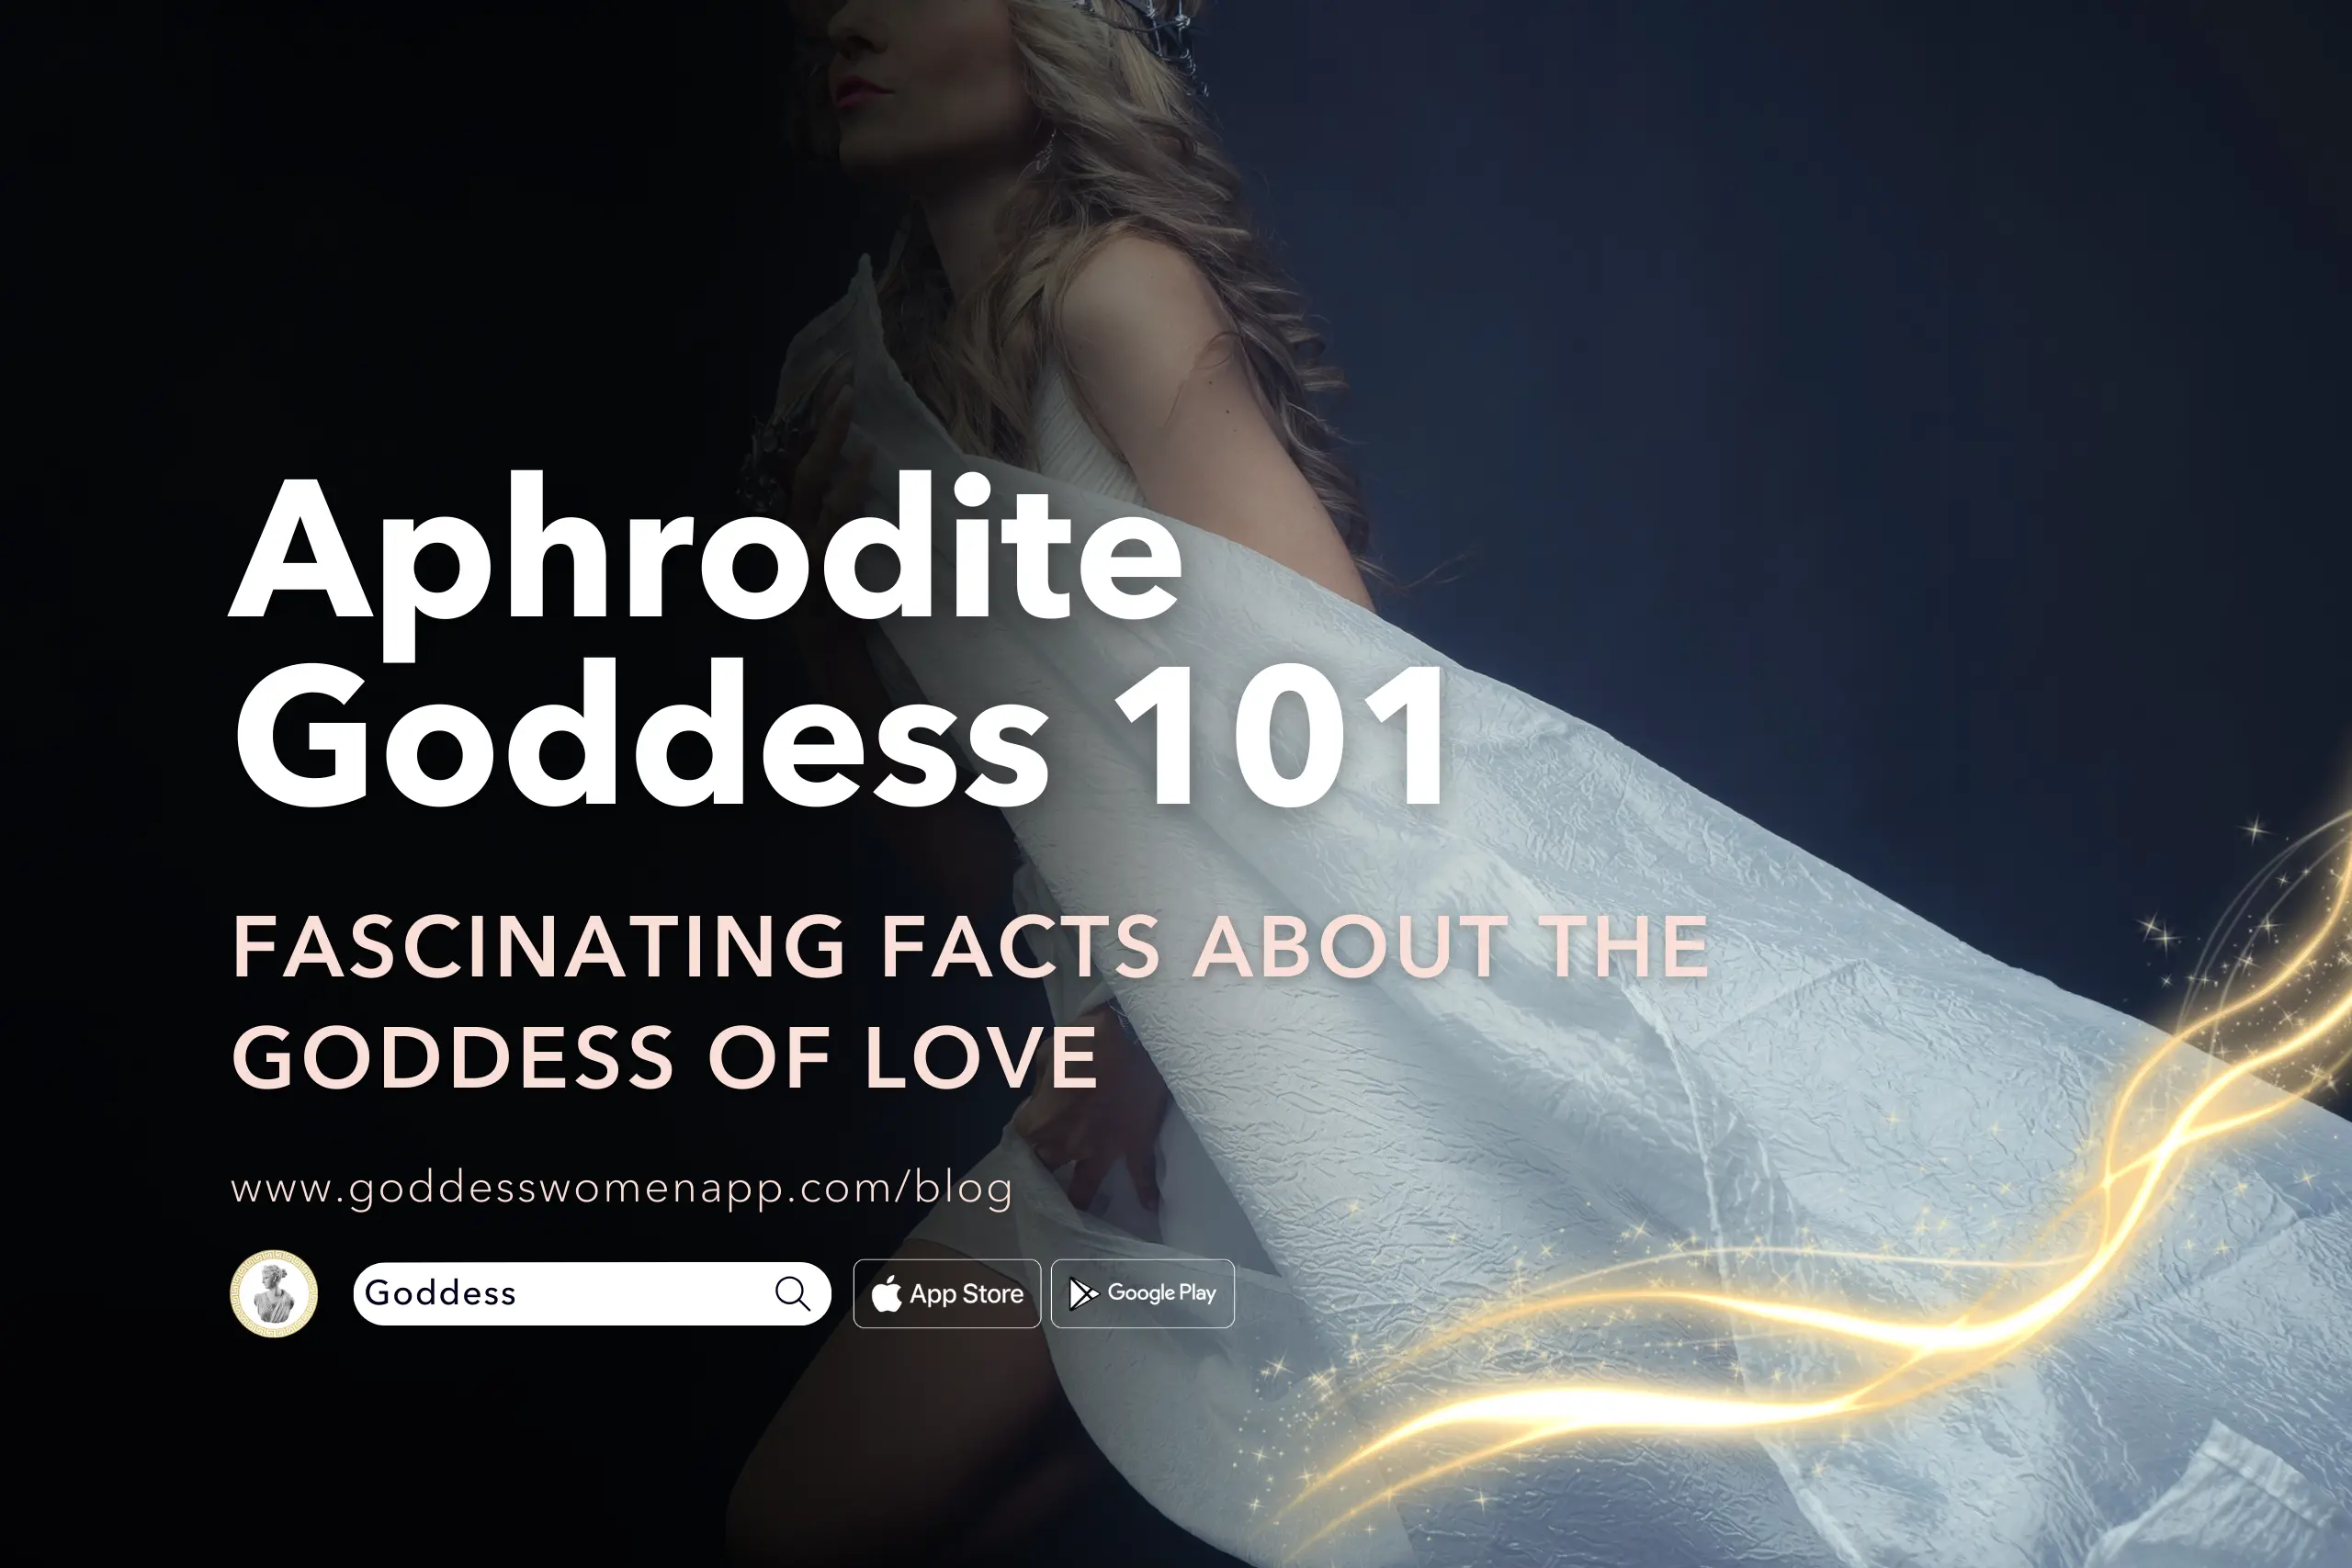 Aphrodite Goddess 101: Fascinating Facts About the Goddess of Love